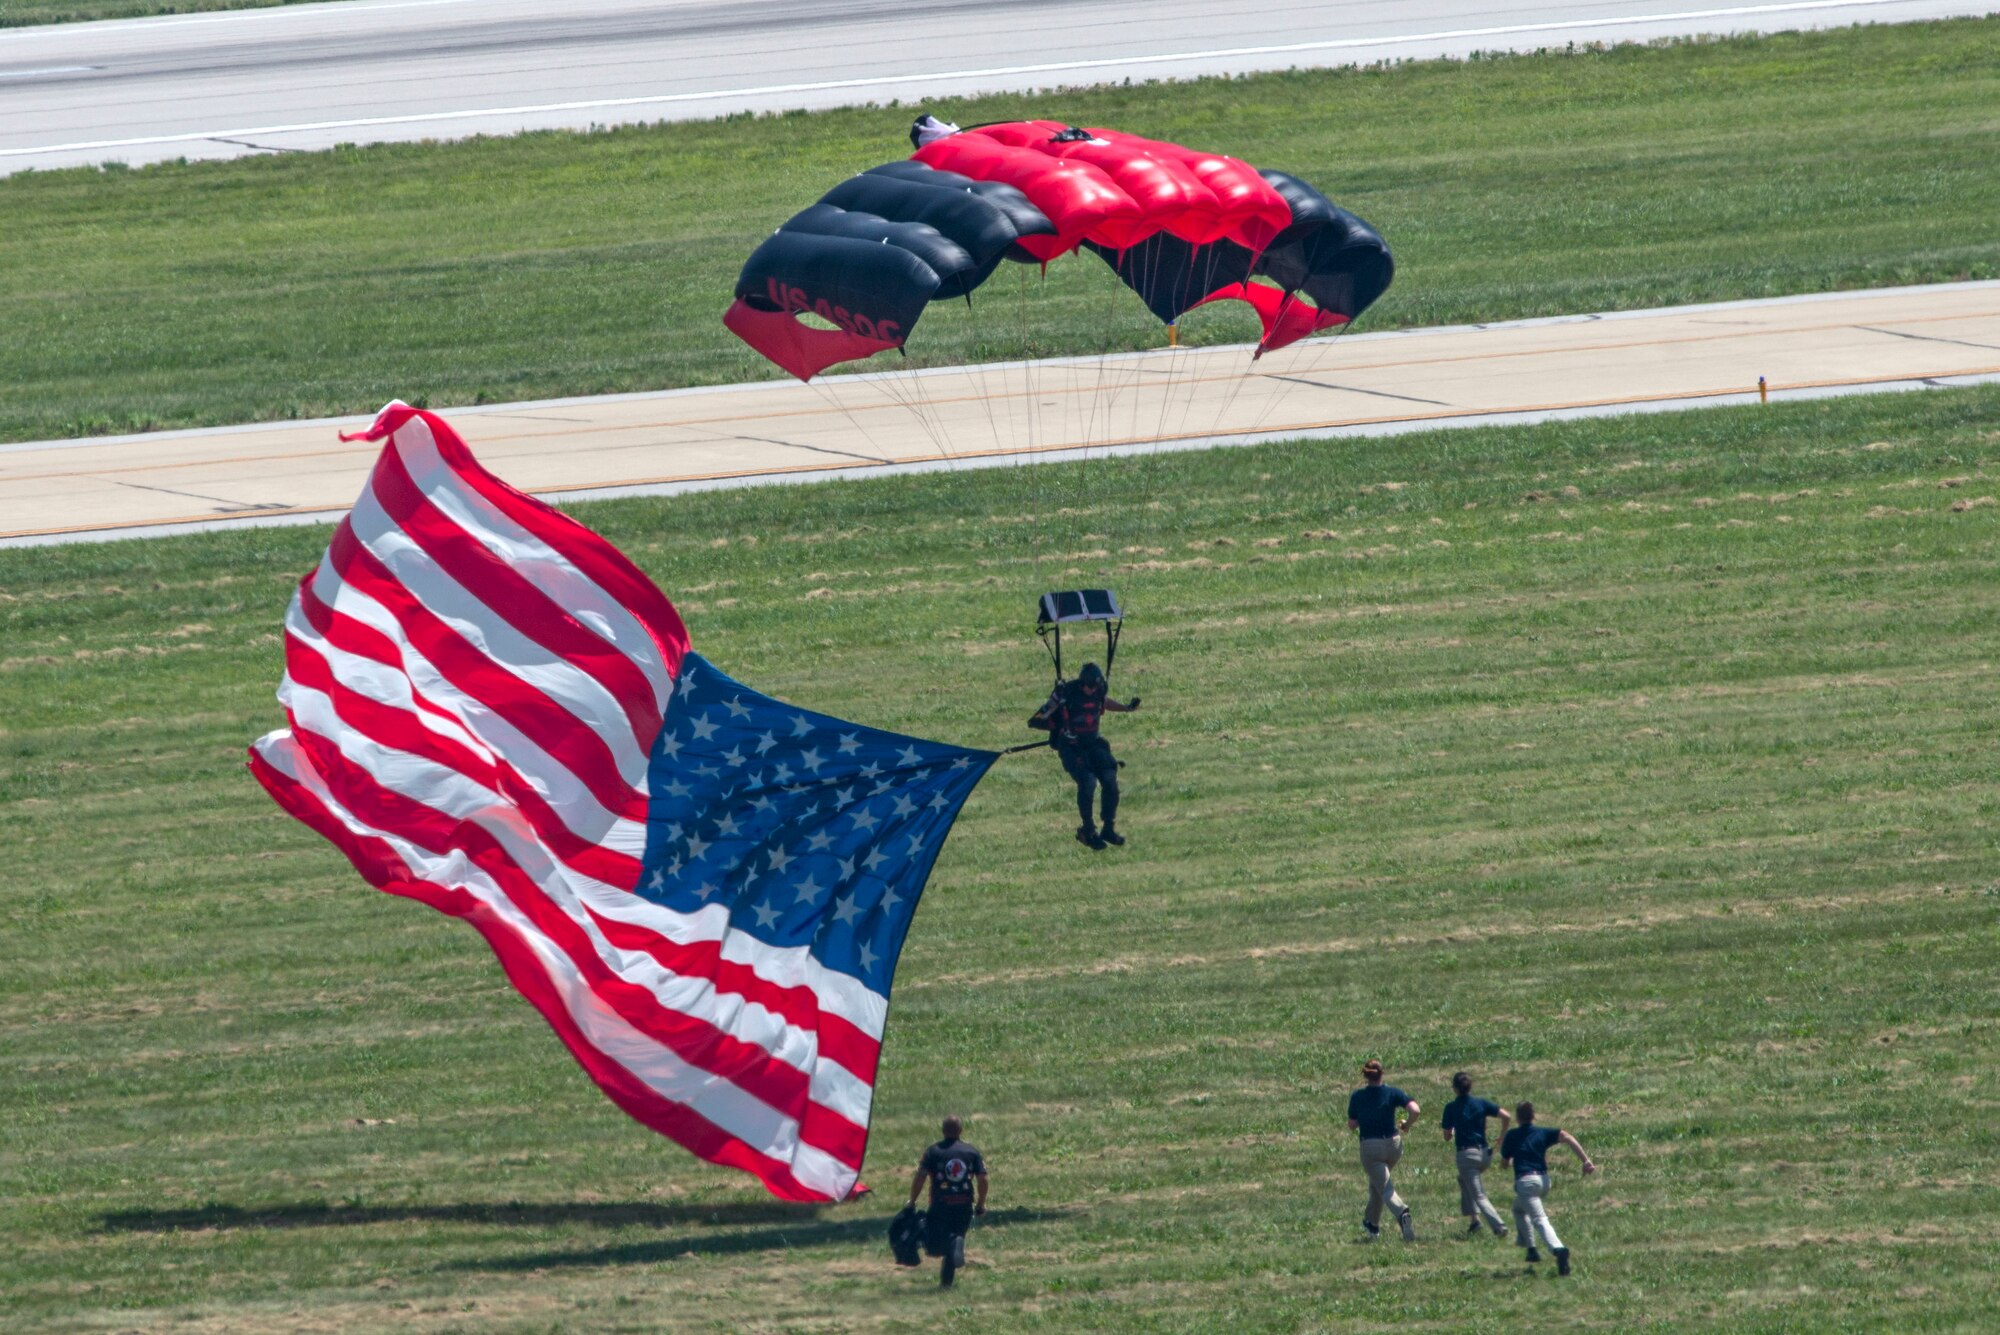 Members of the Black Daggers, the official U.S. Army Special Operations Command Parachute Demonstration Team, perform aerial stunts during Scott Air Force Base 2017 Air Show and Open House June 11, which celebrates the base’s 100th anniversary.  The black daggers use the military variant of the ram-air parachute, which is a flexible-wing glider.  This allows a free-fall parachutist the ability to jump with more than 100 pounds of additional equipment.(U.S. Air Force photo/Senior Airman Tristin English)